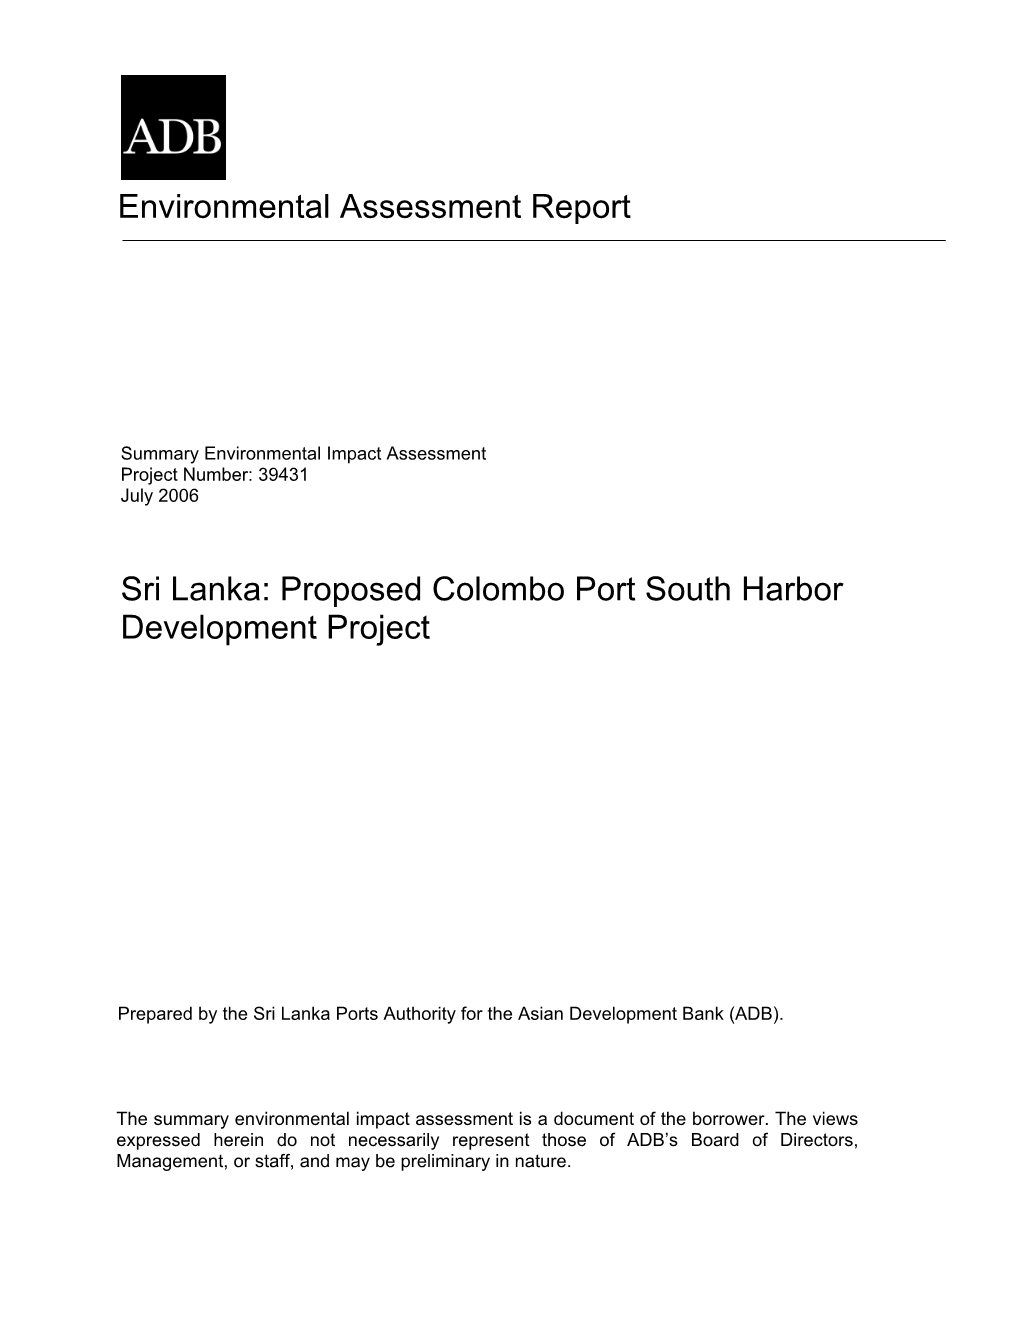 Proposed Colombo Port South Harbor Development Project